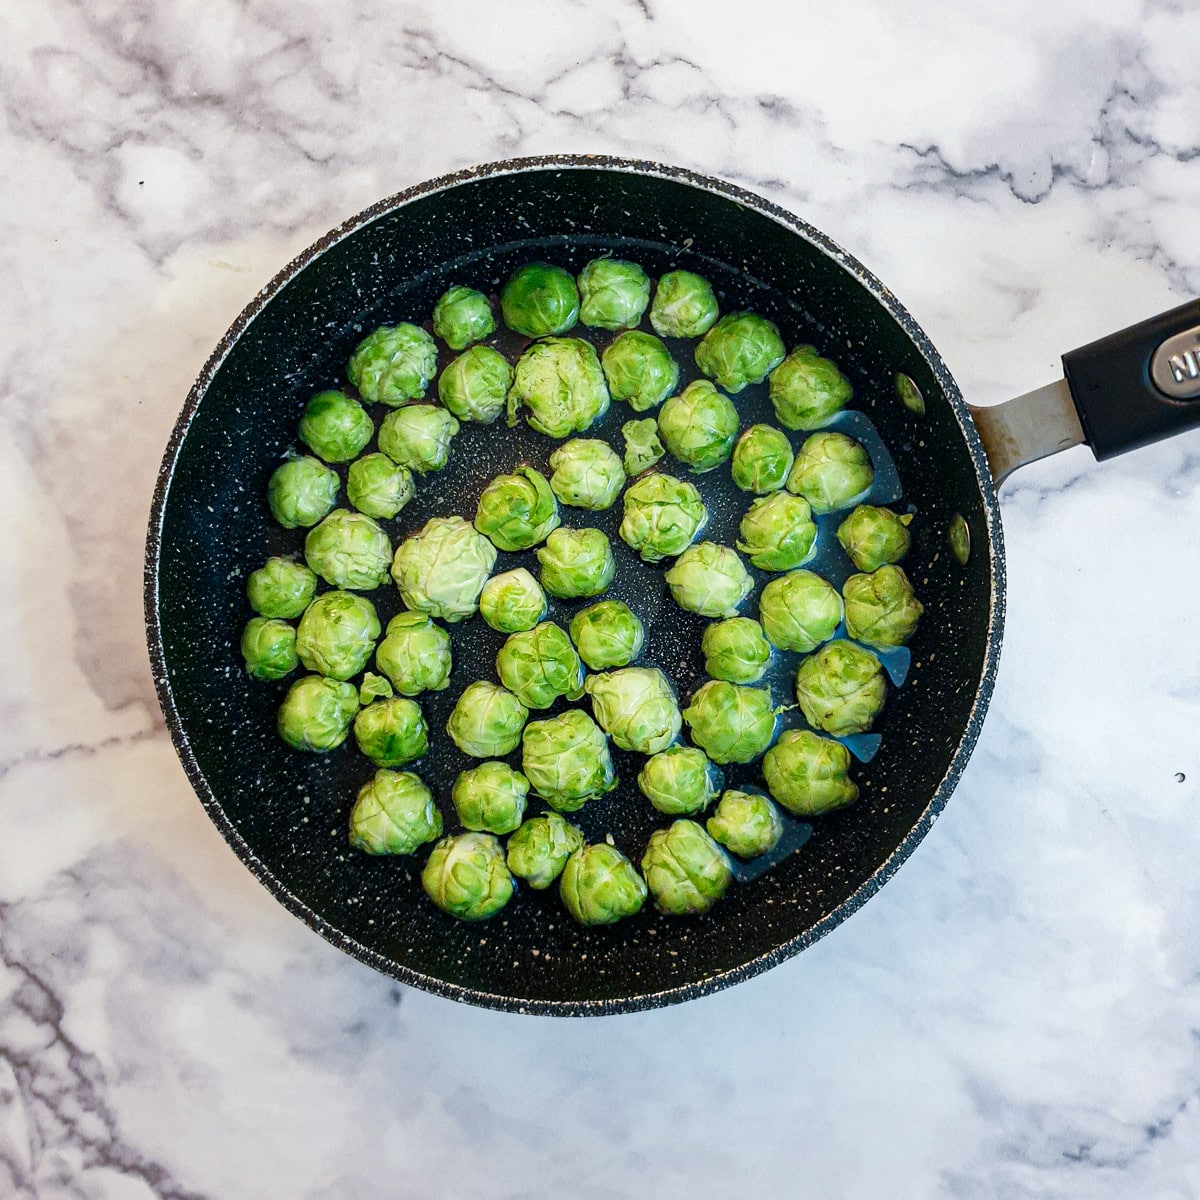 Brussels sprouts in a saucepan of water.